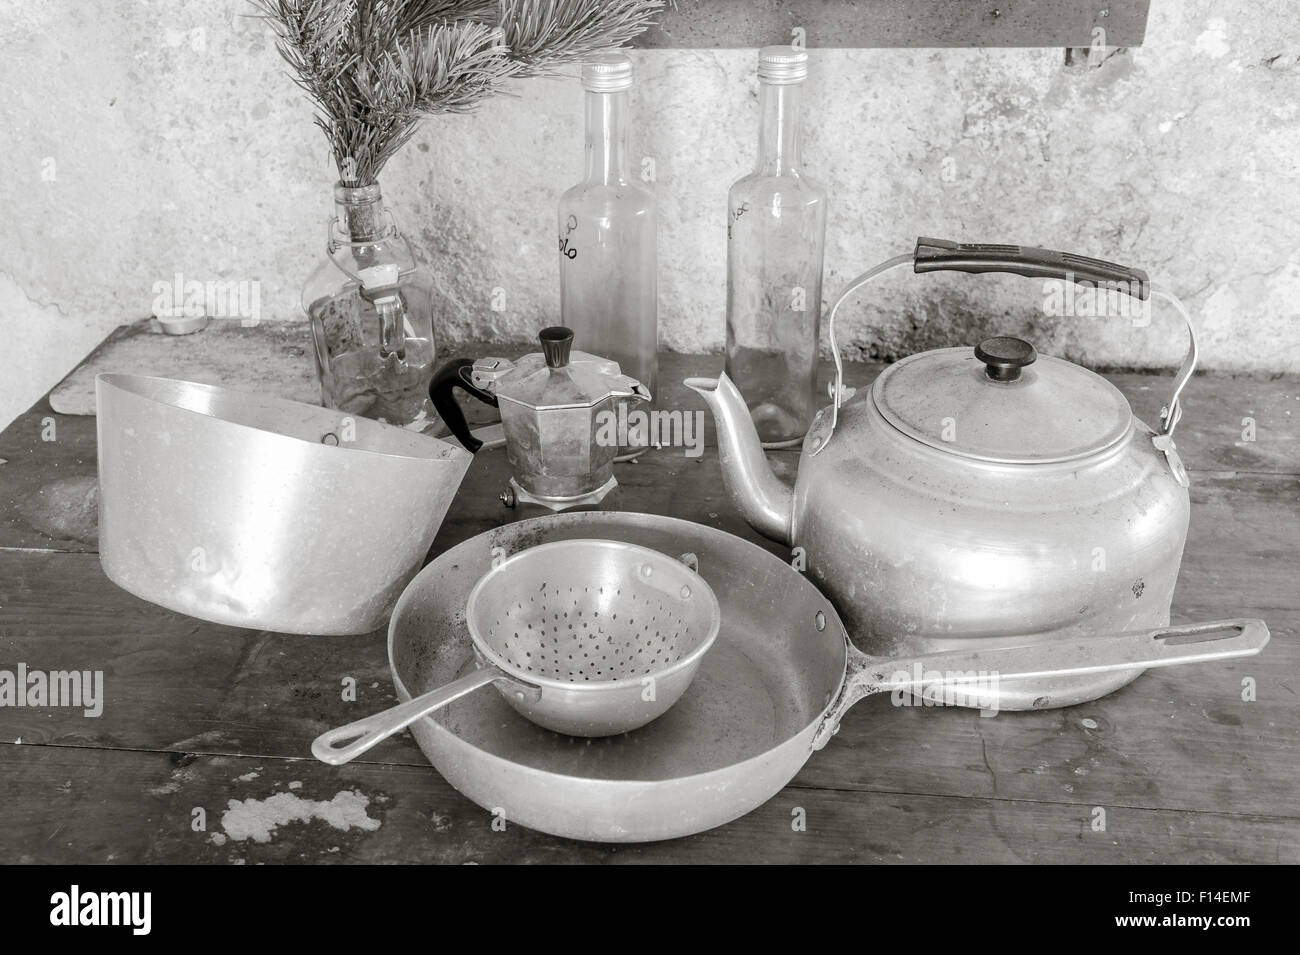 Old objects on a table to kitchen: pans, sieve, kettle, coffepot and three bottles Stock Photo